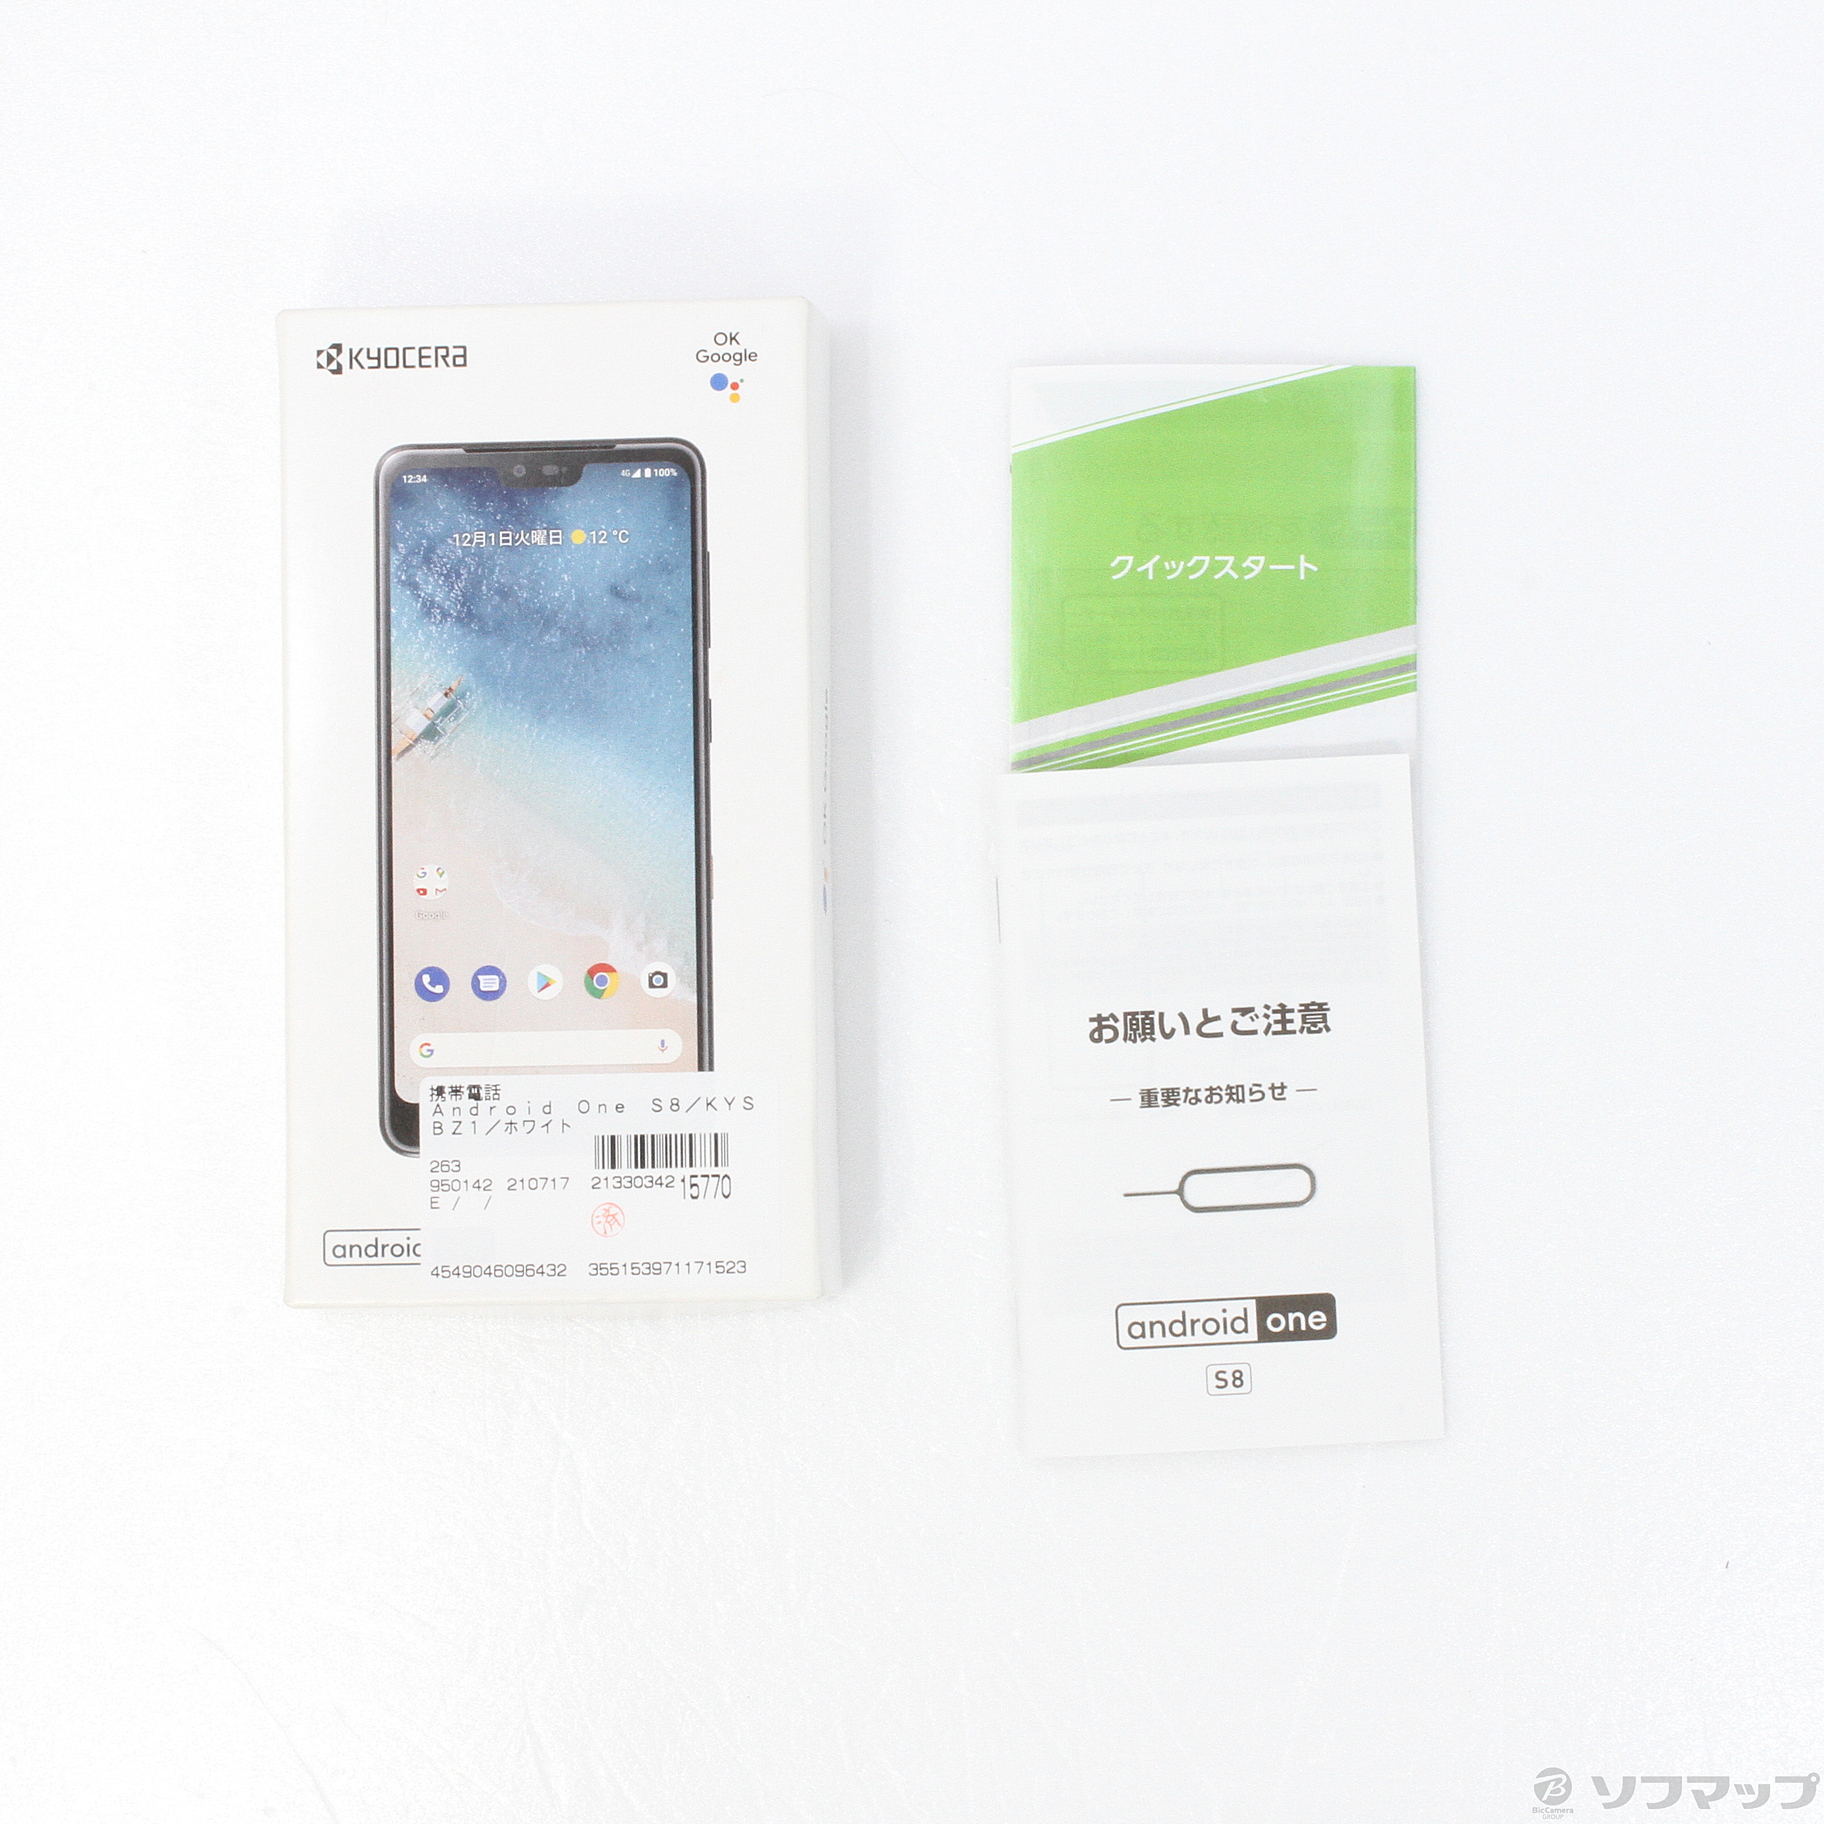 SALE／10%OFF HSF30 Android one S3-SH Y Mobile スマホ本体